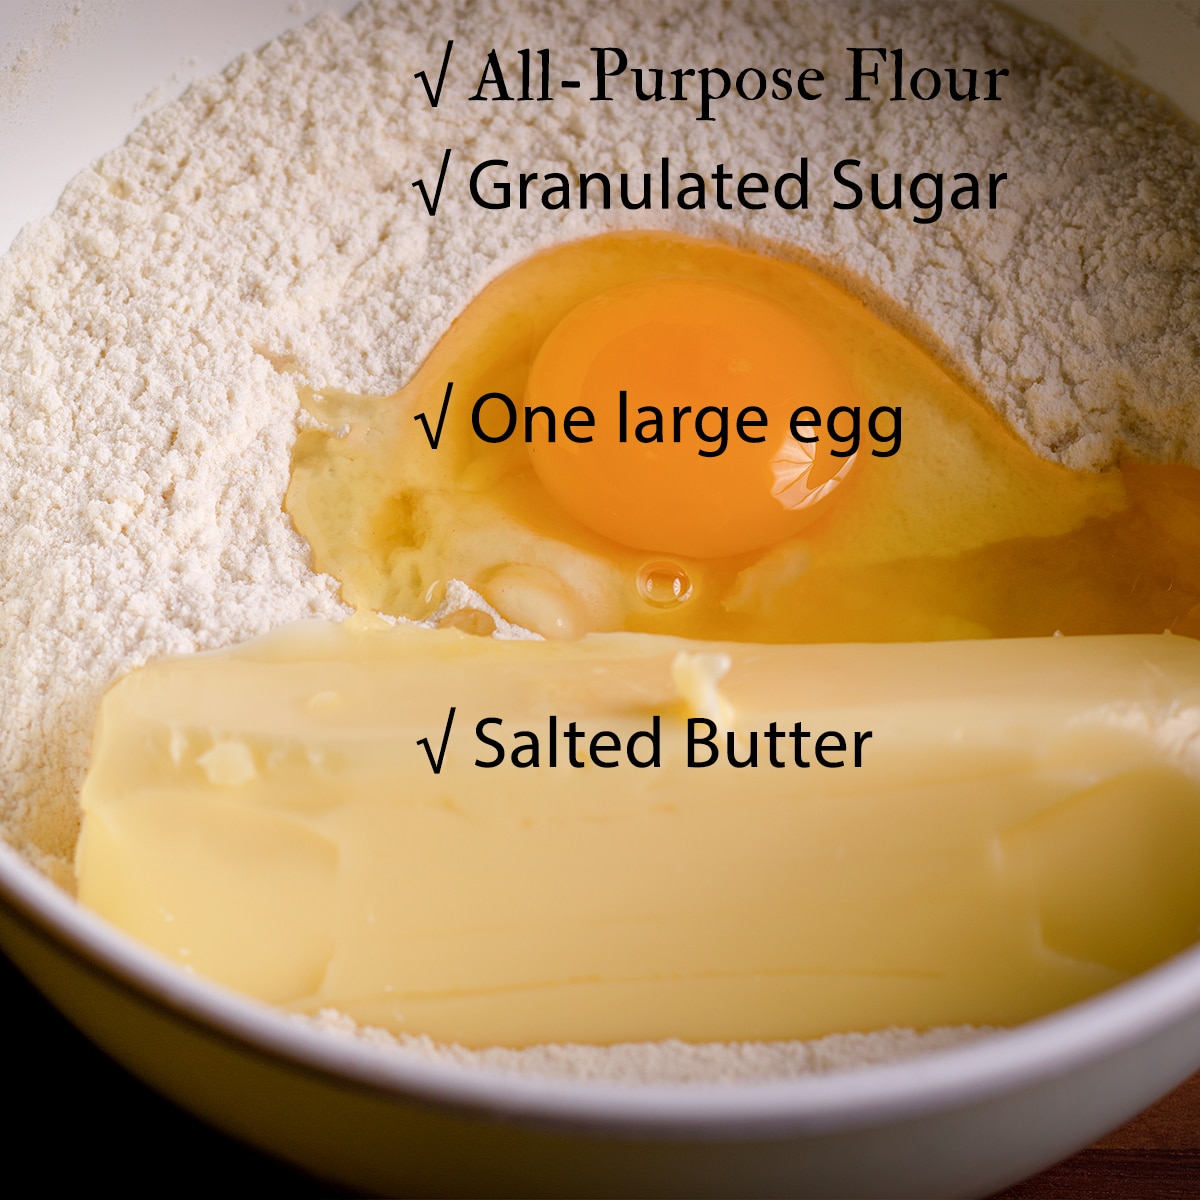 All the ingredients needed to make a shortbread crust.